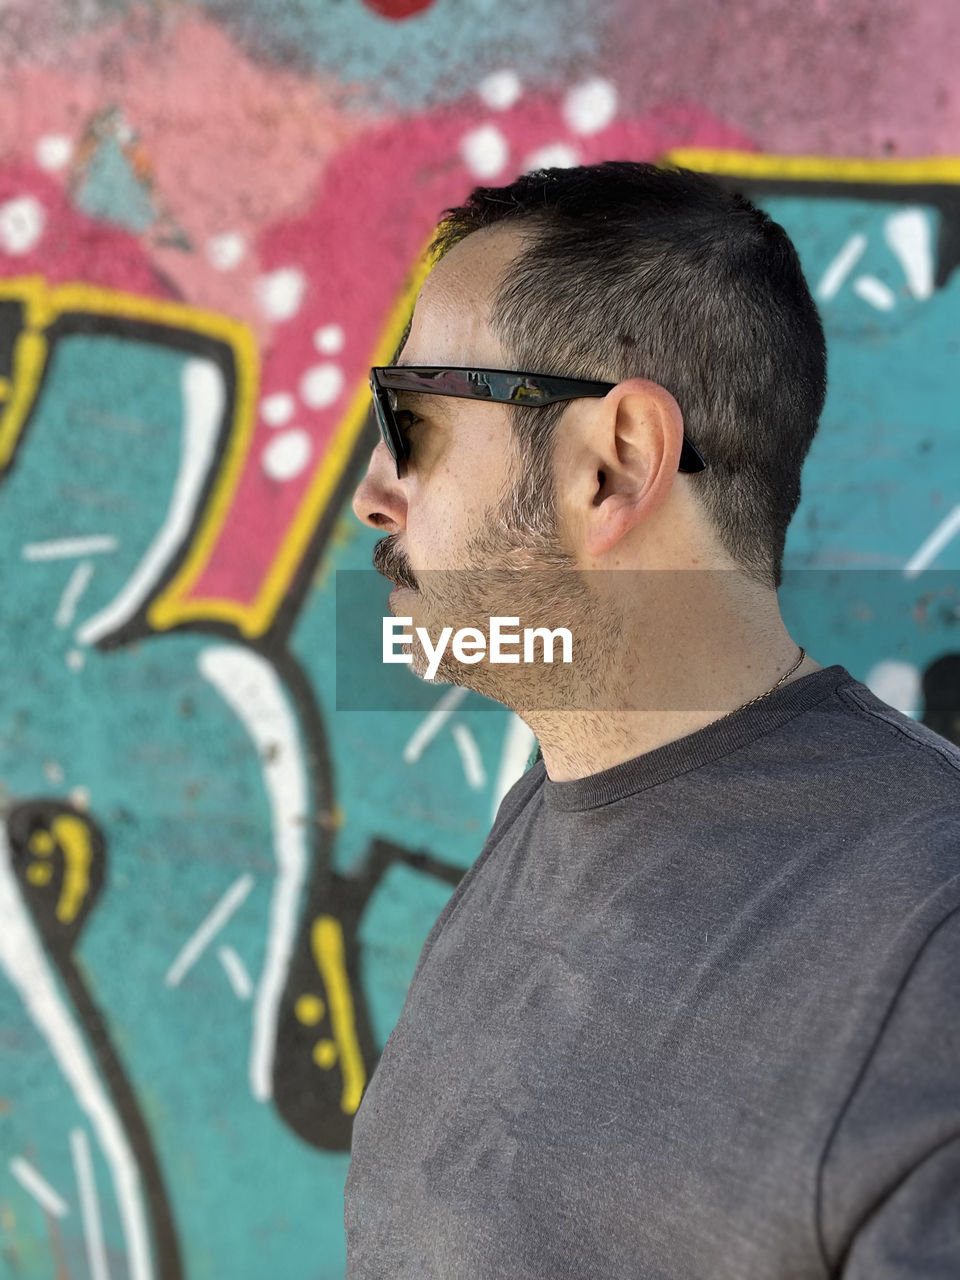 portrait of young man wearing sunglasses standing against wall